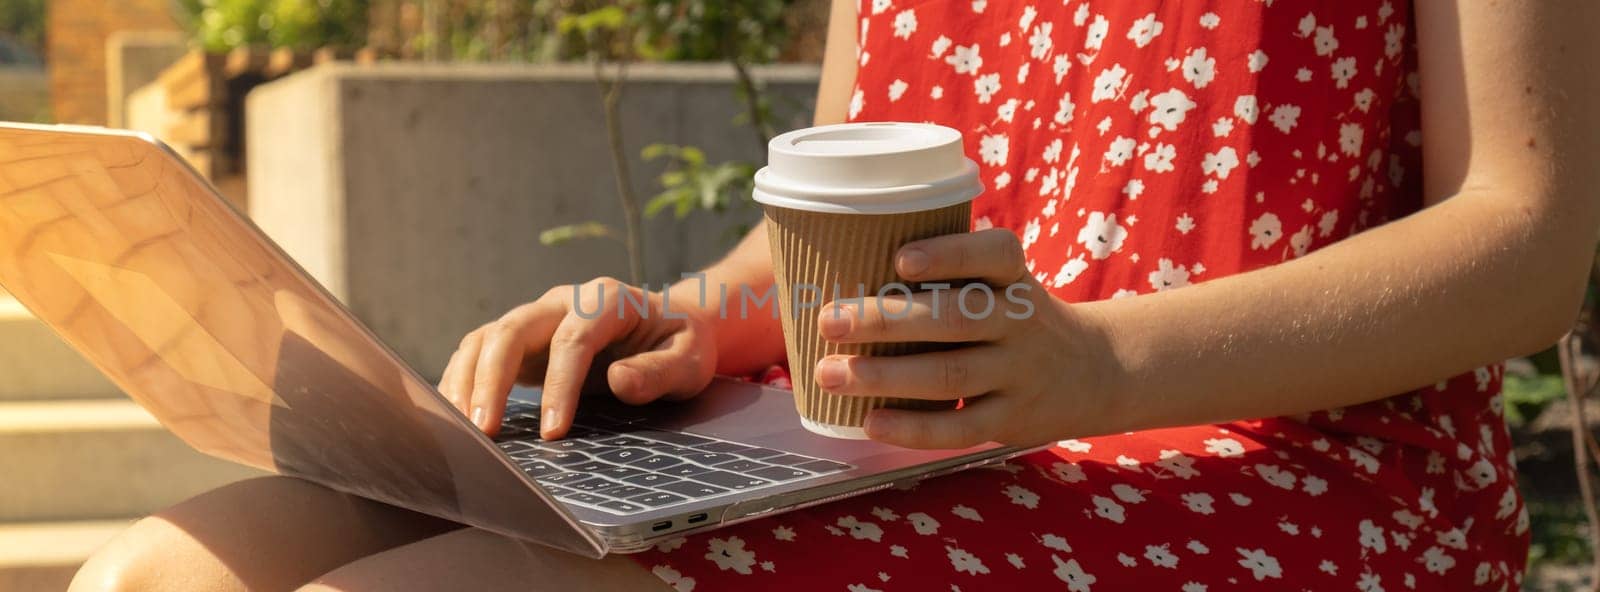 Unrecognizable Young woman in red dress drinking Take away coffee in craft recycling paper cup with laptop. Freelancer's place of work. Study and work online. Remote business education. View webinar. E-learning Workstation on wooden bench. Mockup Coffee break. Making plans for next week year. Being mindful reducing stress and slowing-down